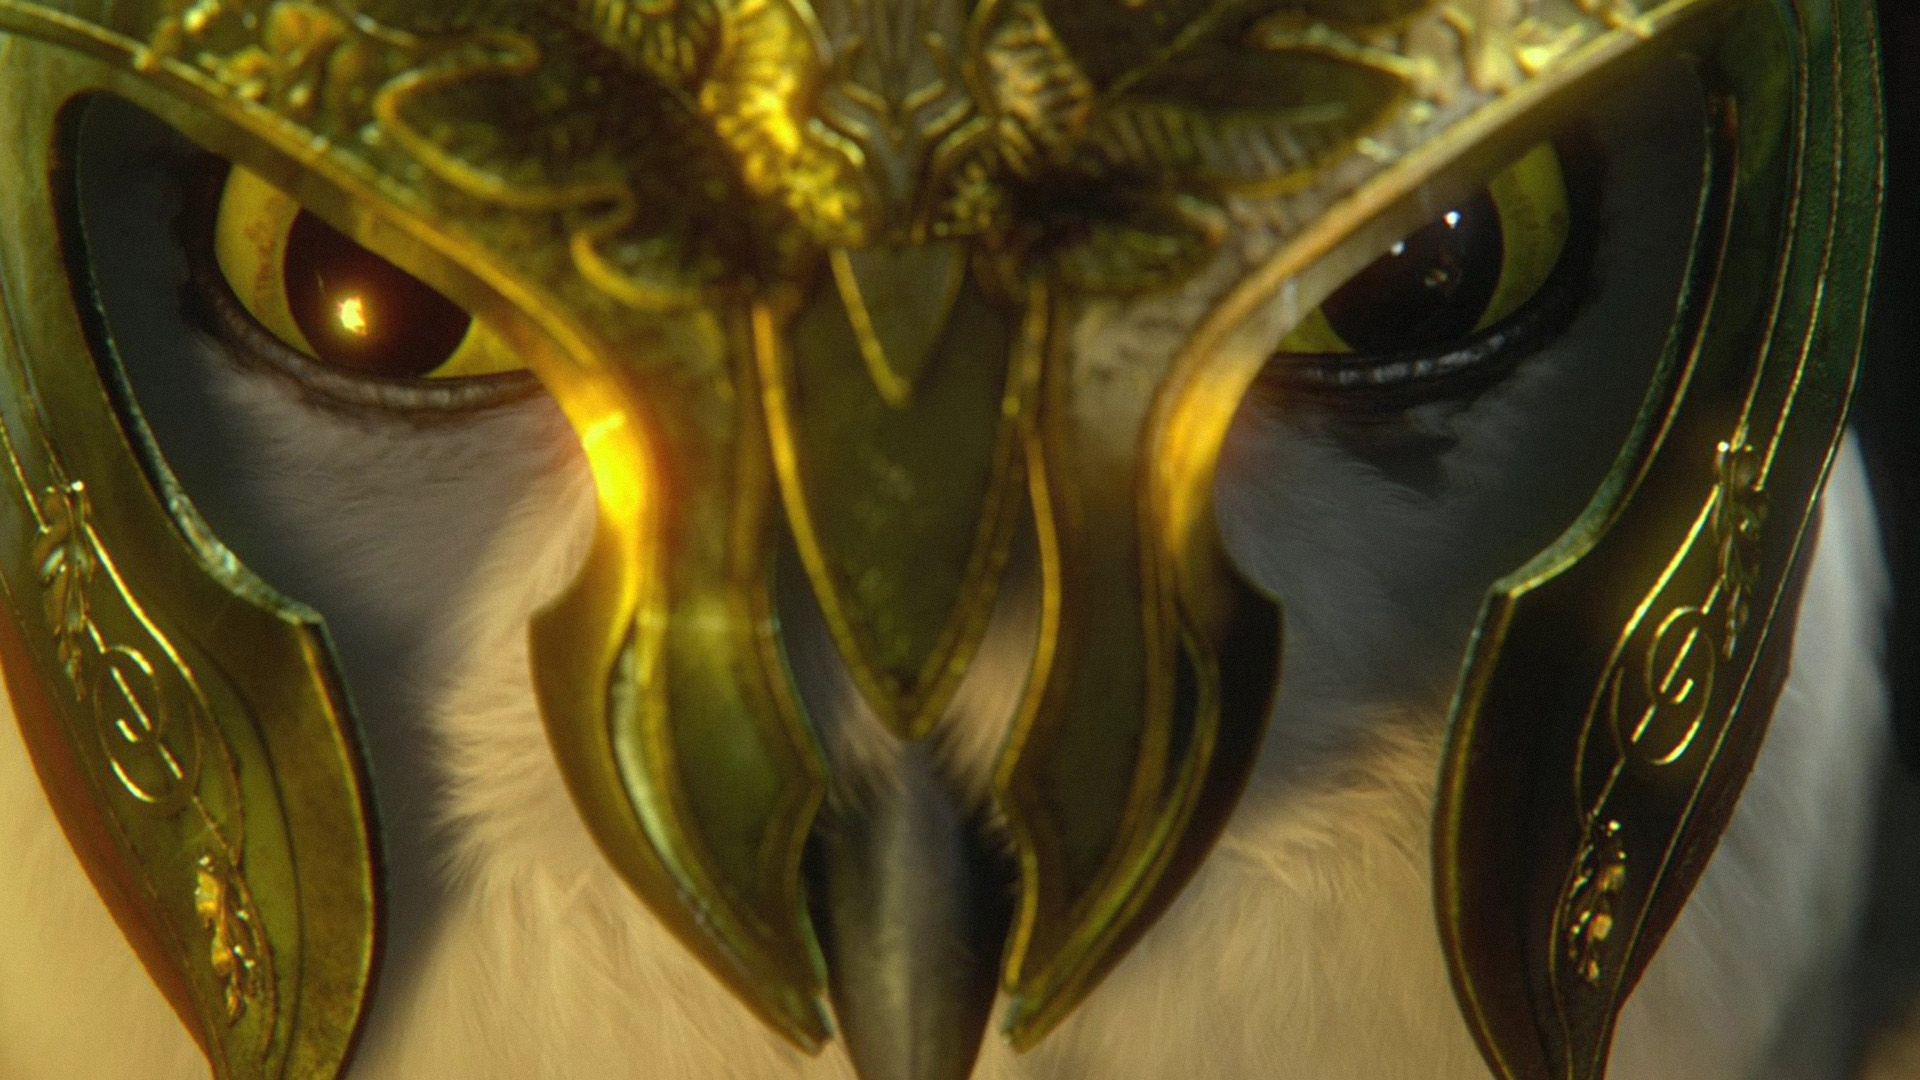 Legend of the Guardians: The Owls of Ga'Hoole background